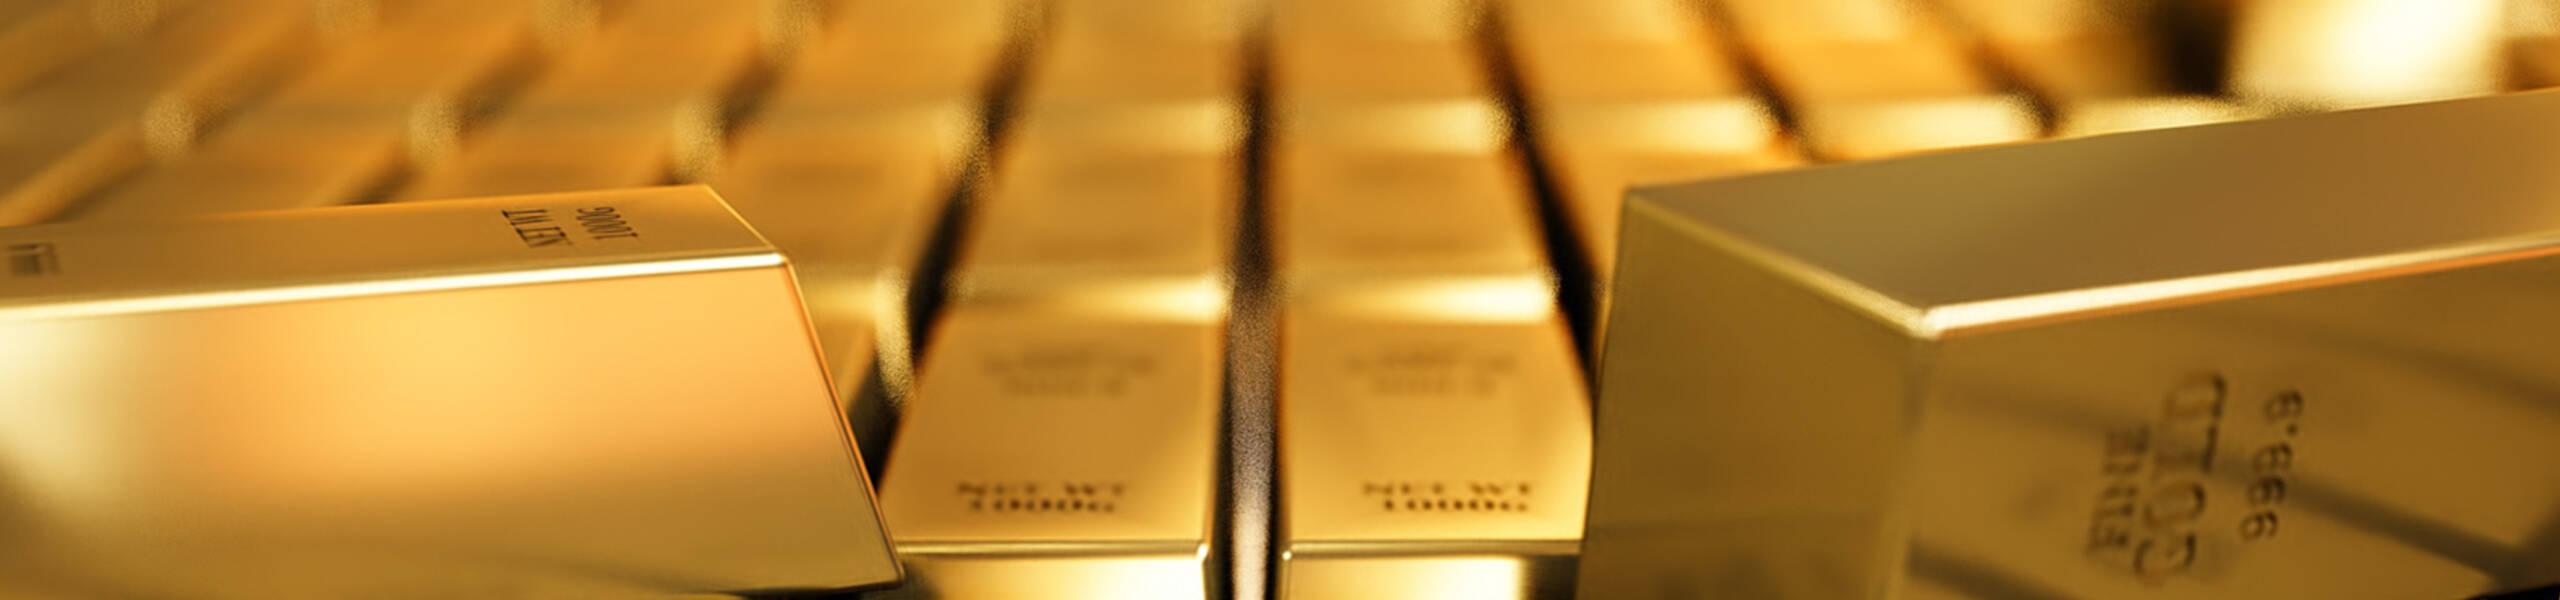 Gold approached a milestone